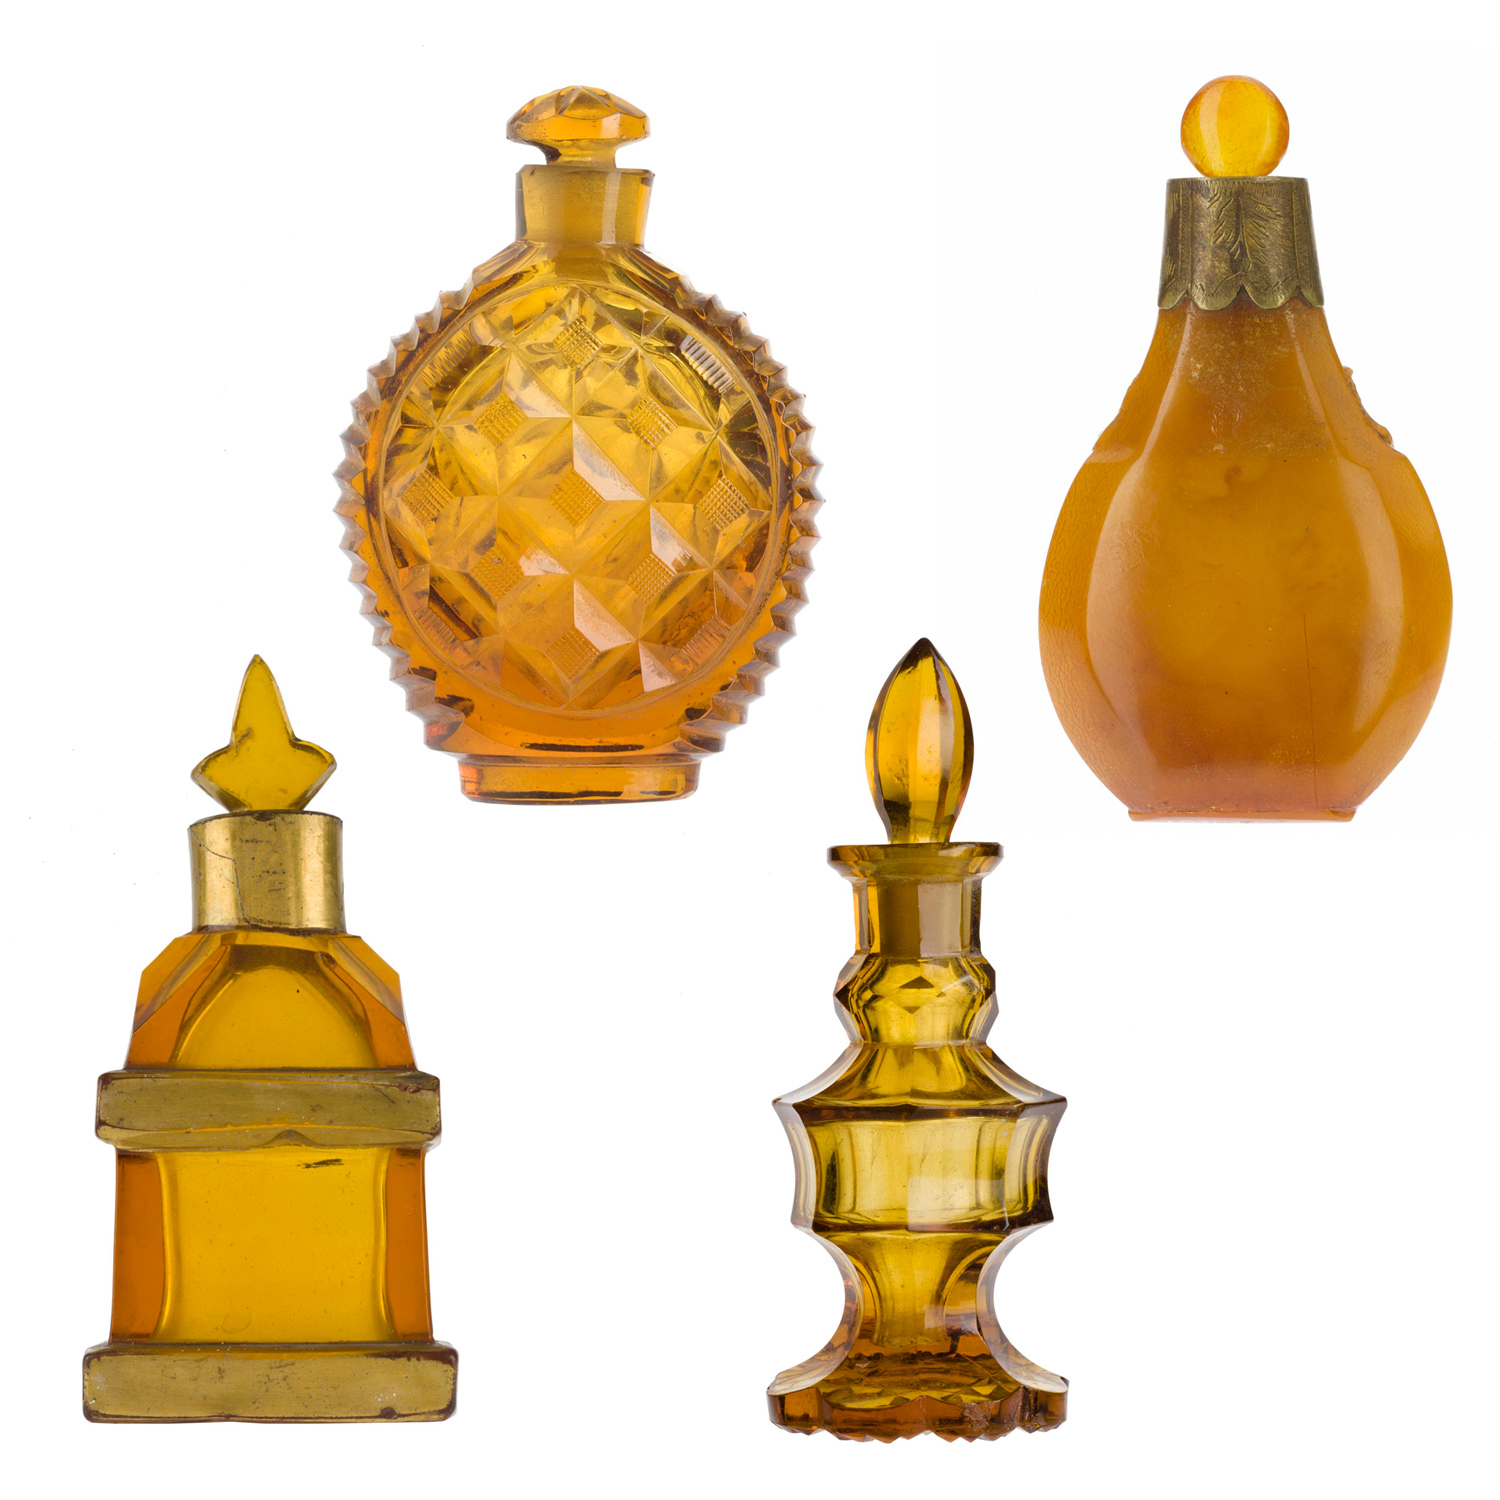 Four scent bottles were collected by Ida Pappenheim.